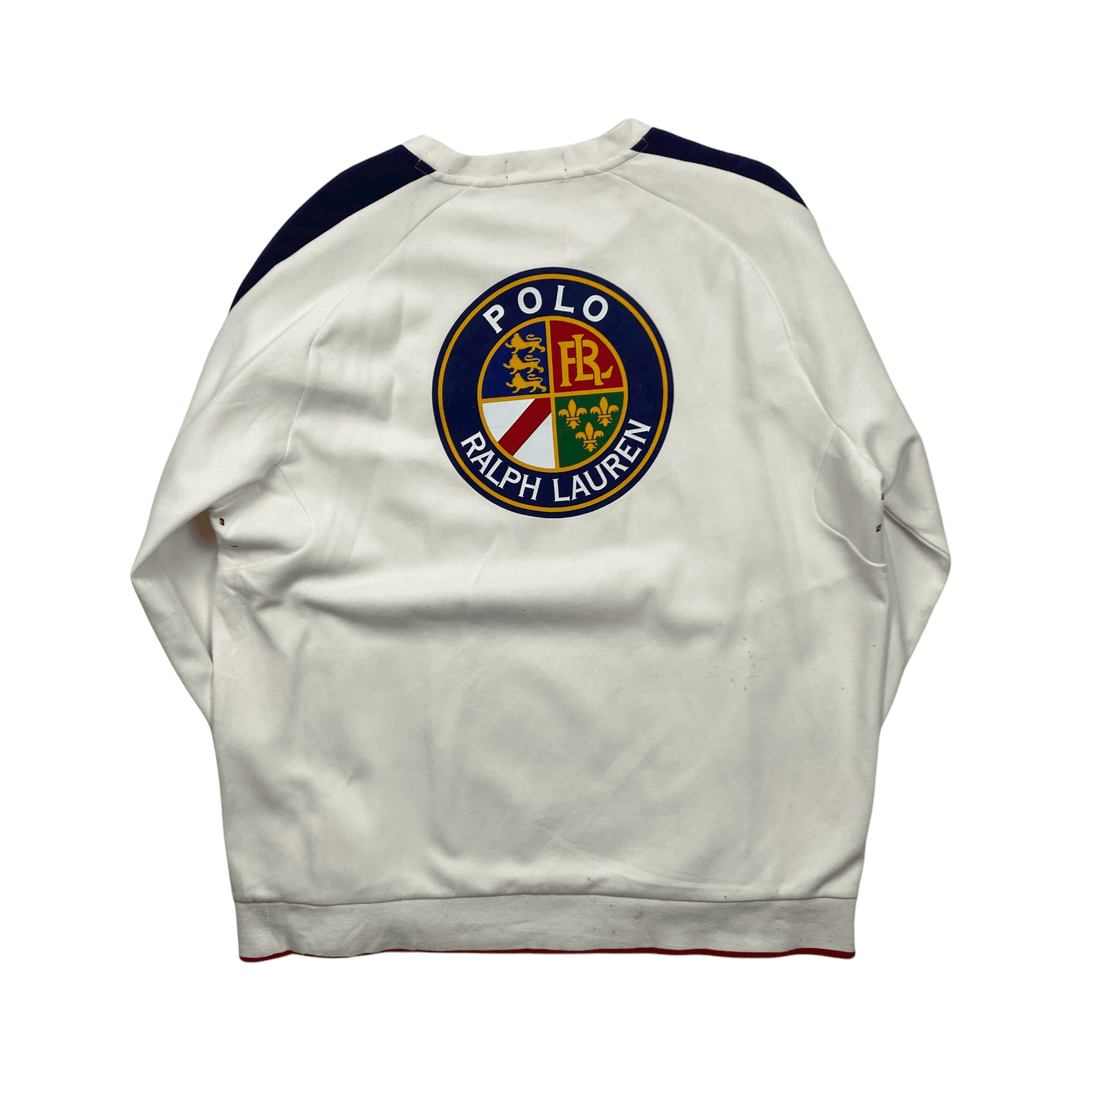 Vintage 90s White Polo Ralph Lauren Ski Crest Spell-Out Sweatshirt - Extra Large - The Streetwear Studio